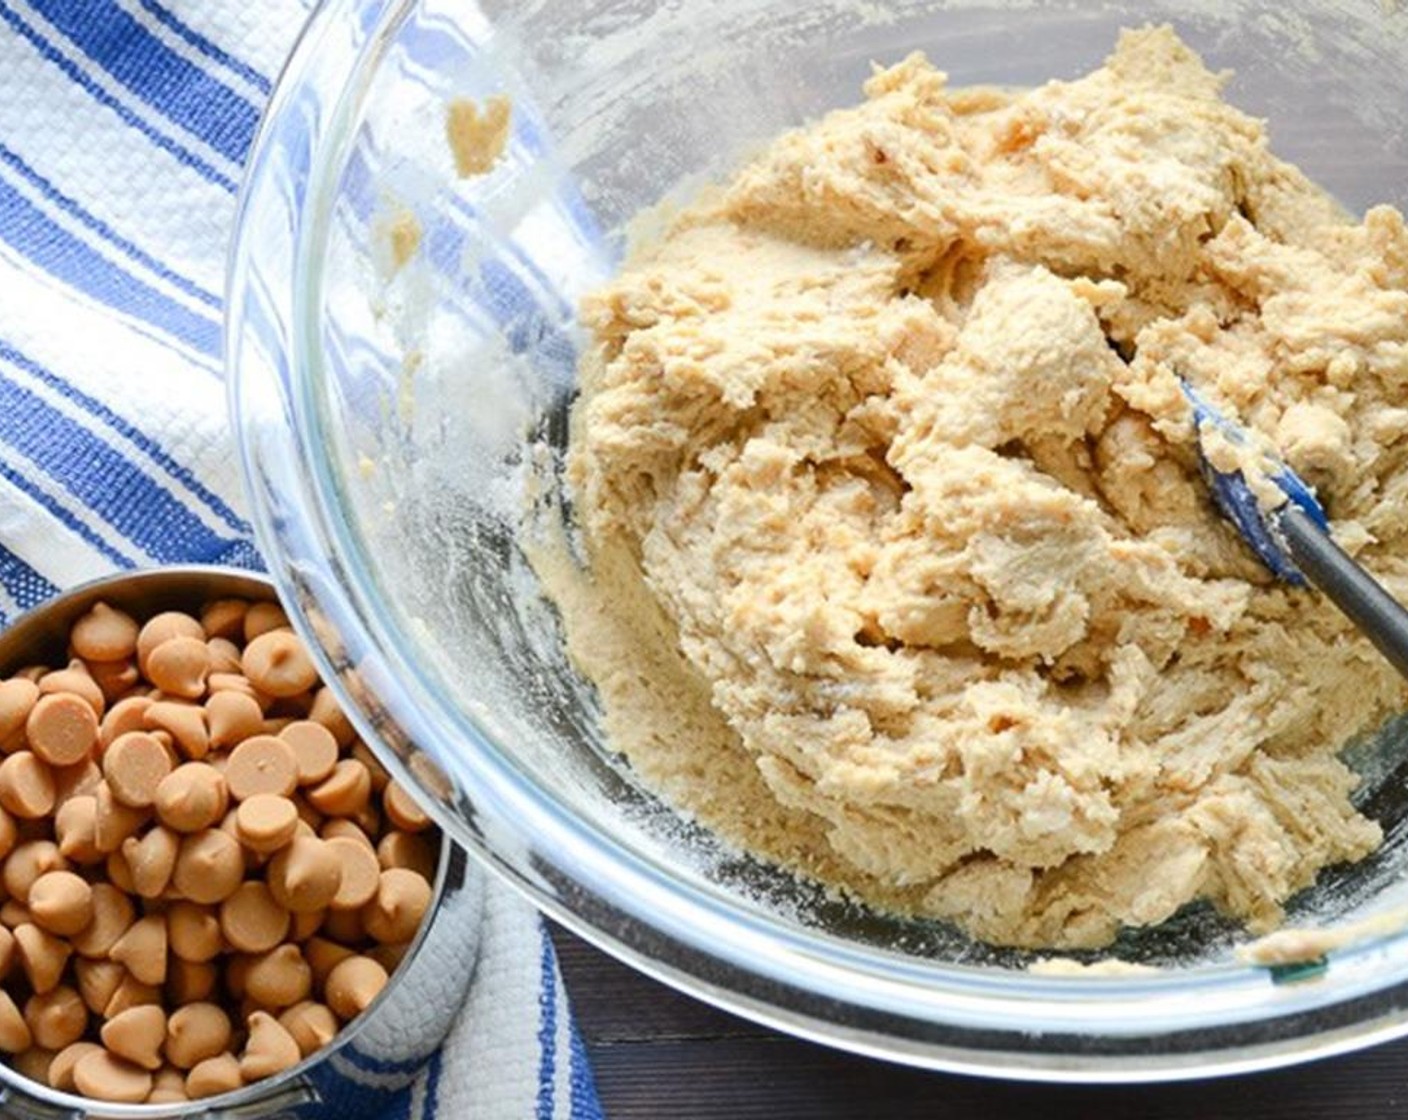 step 4 Sift the All-Purpose Flour (1 1/2 cups), Baking Soda (1 tsp), and Salt (1/2 tsp) together. Add the Peanut Butter Chips (1 cup) to the butter mixture, slowly, until just combined and being sure not to overwork the dough.